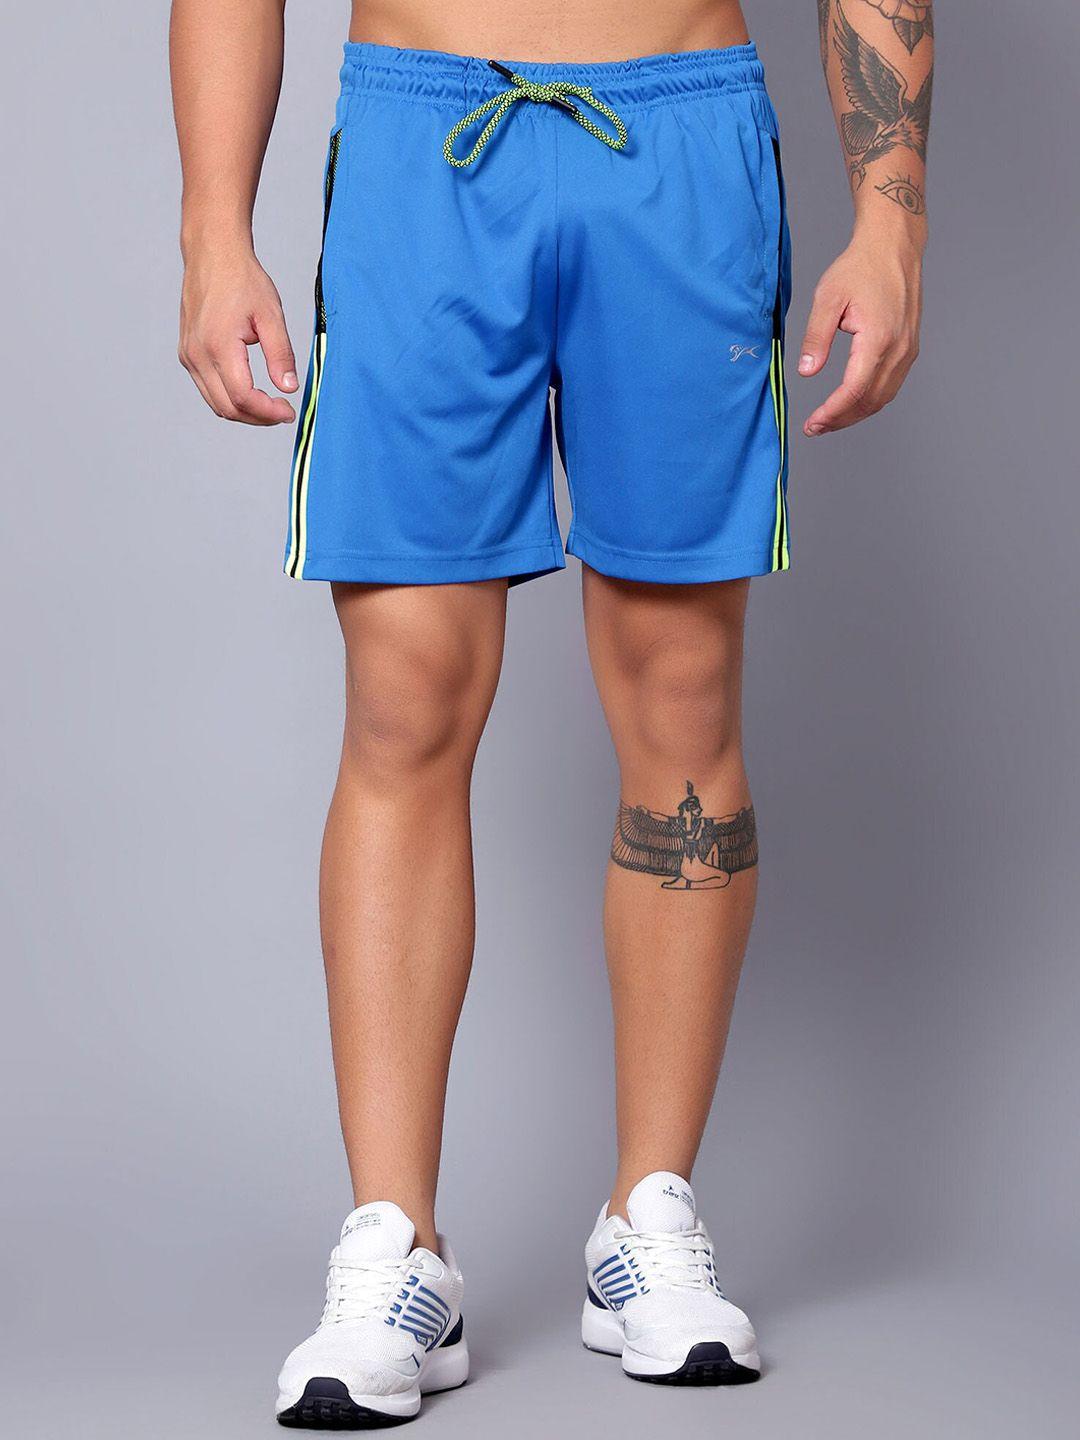 shiv naresh men blue printed outdoor sports shorts with antimicrobial technology